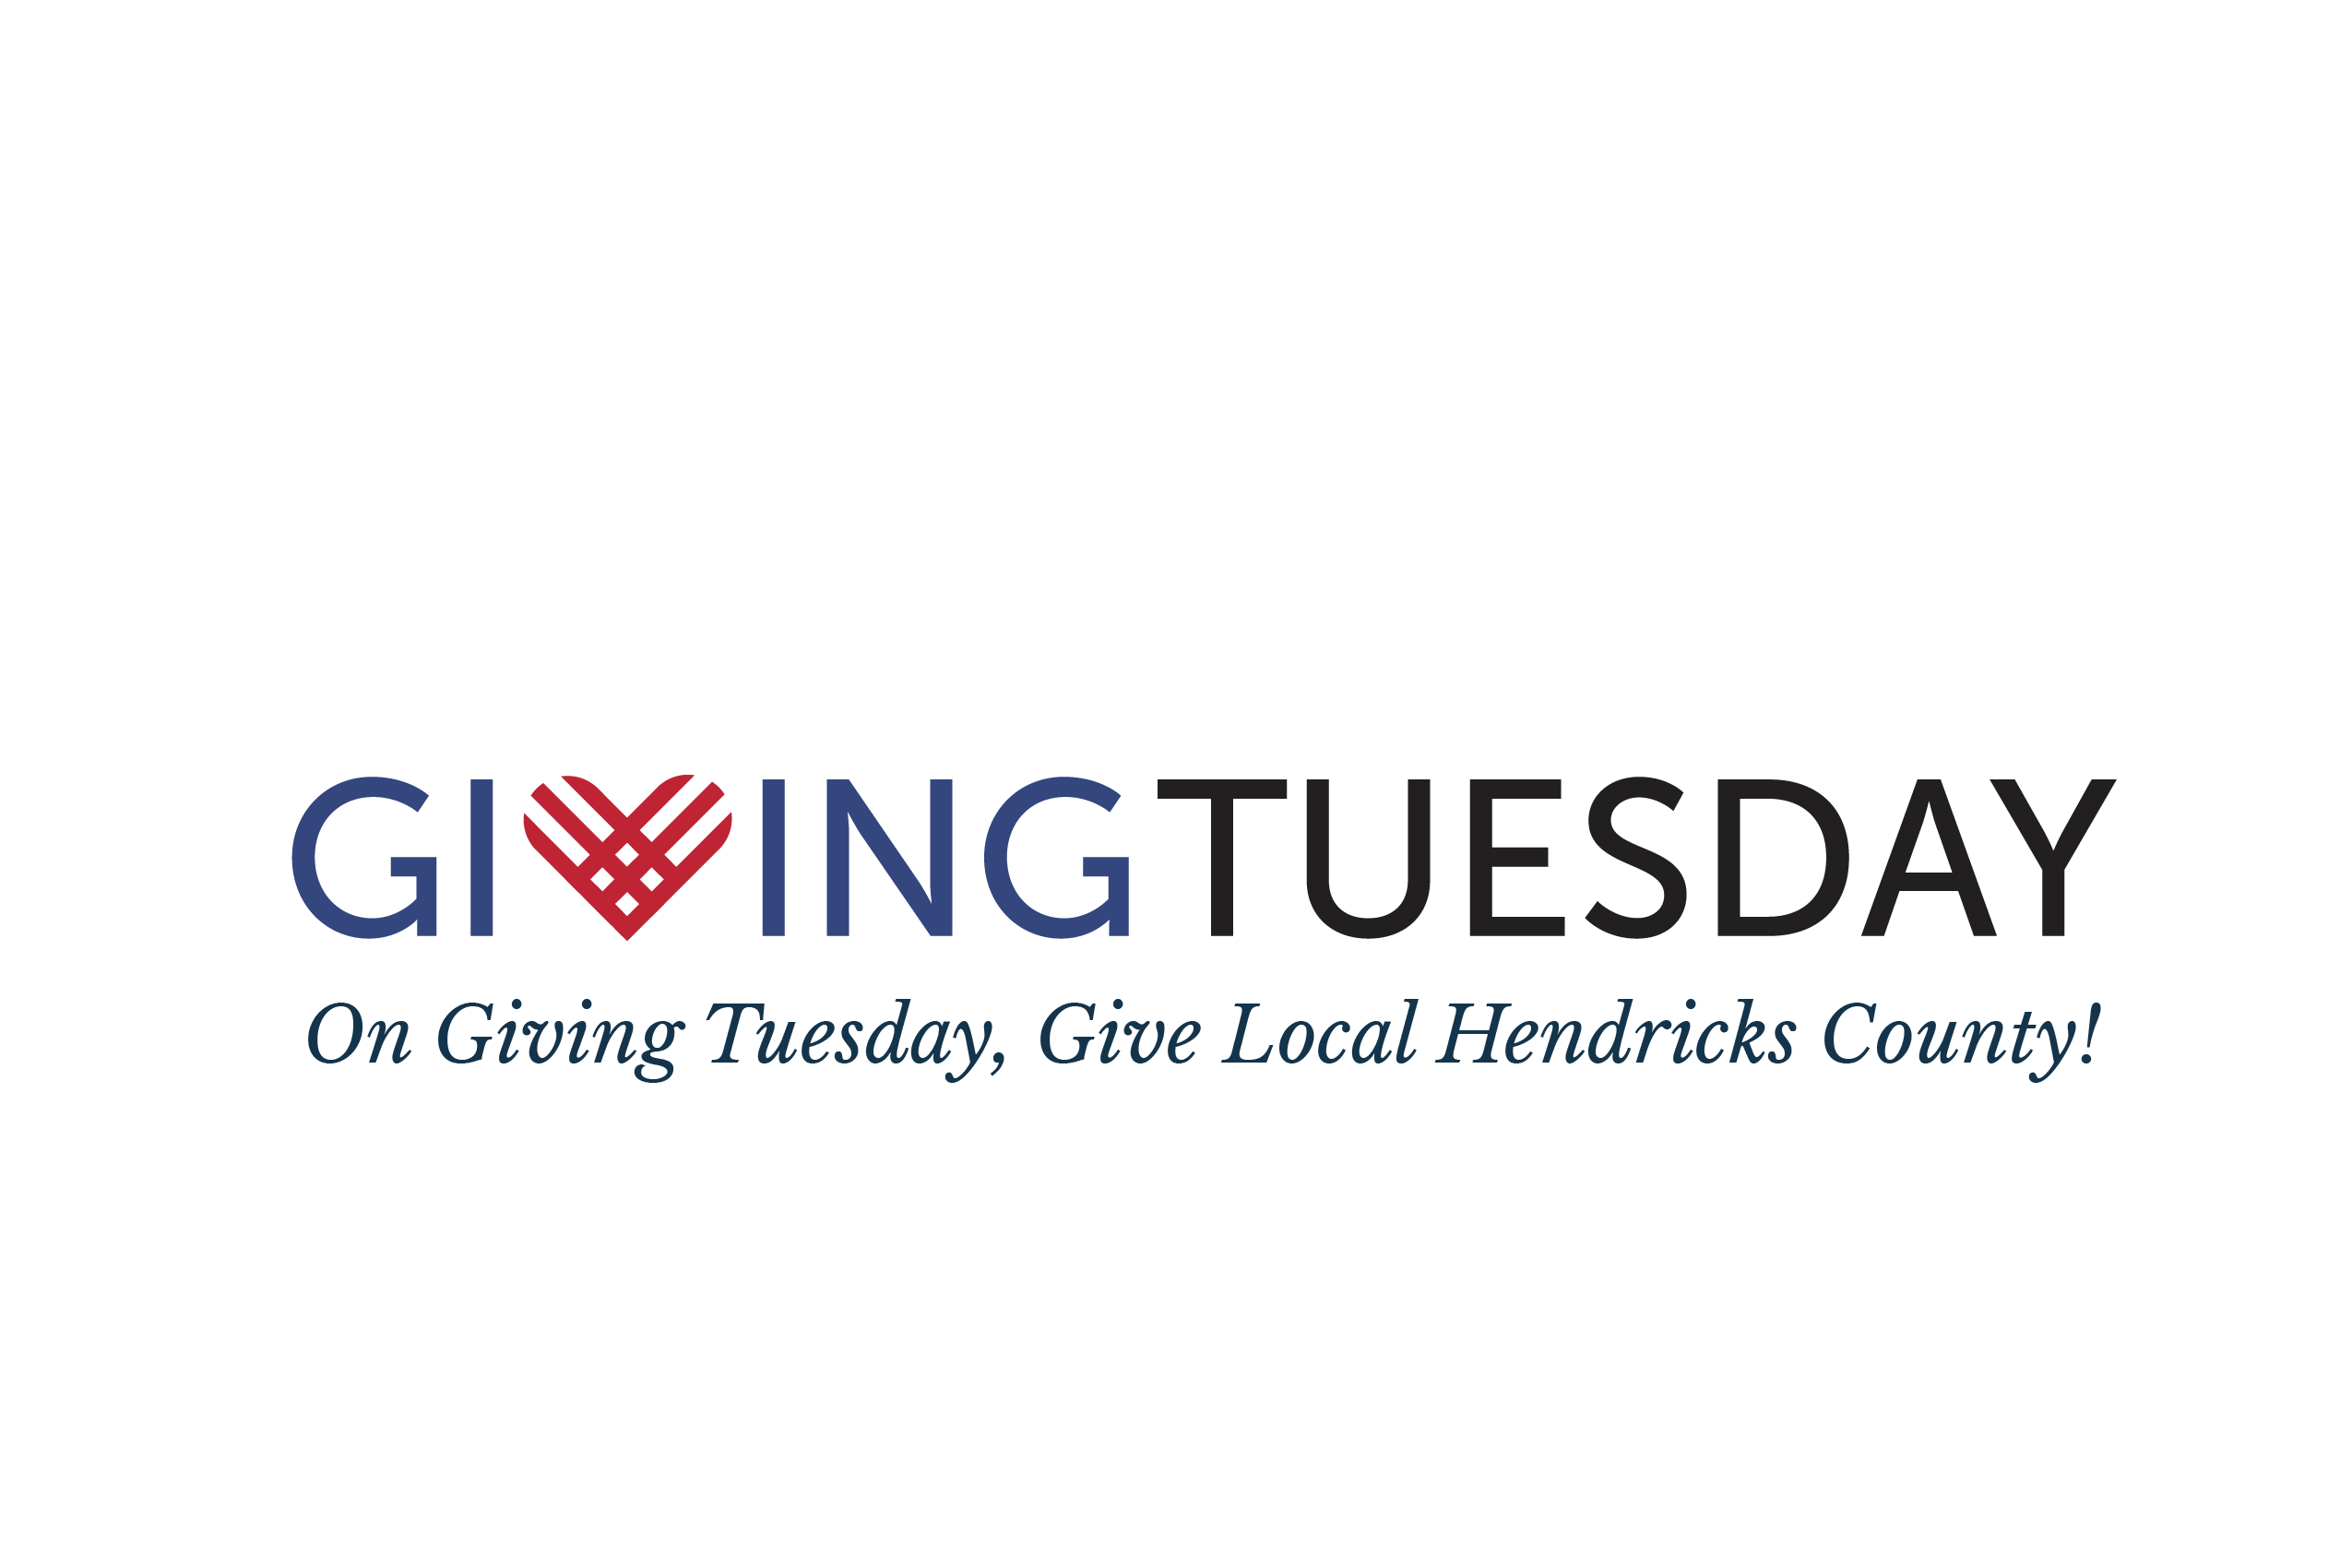 Give Local on Giving Tuesday